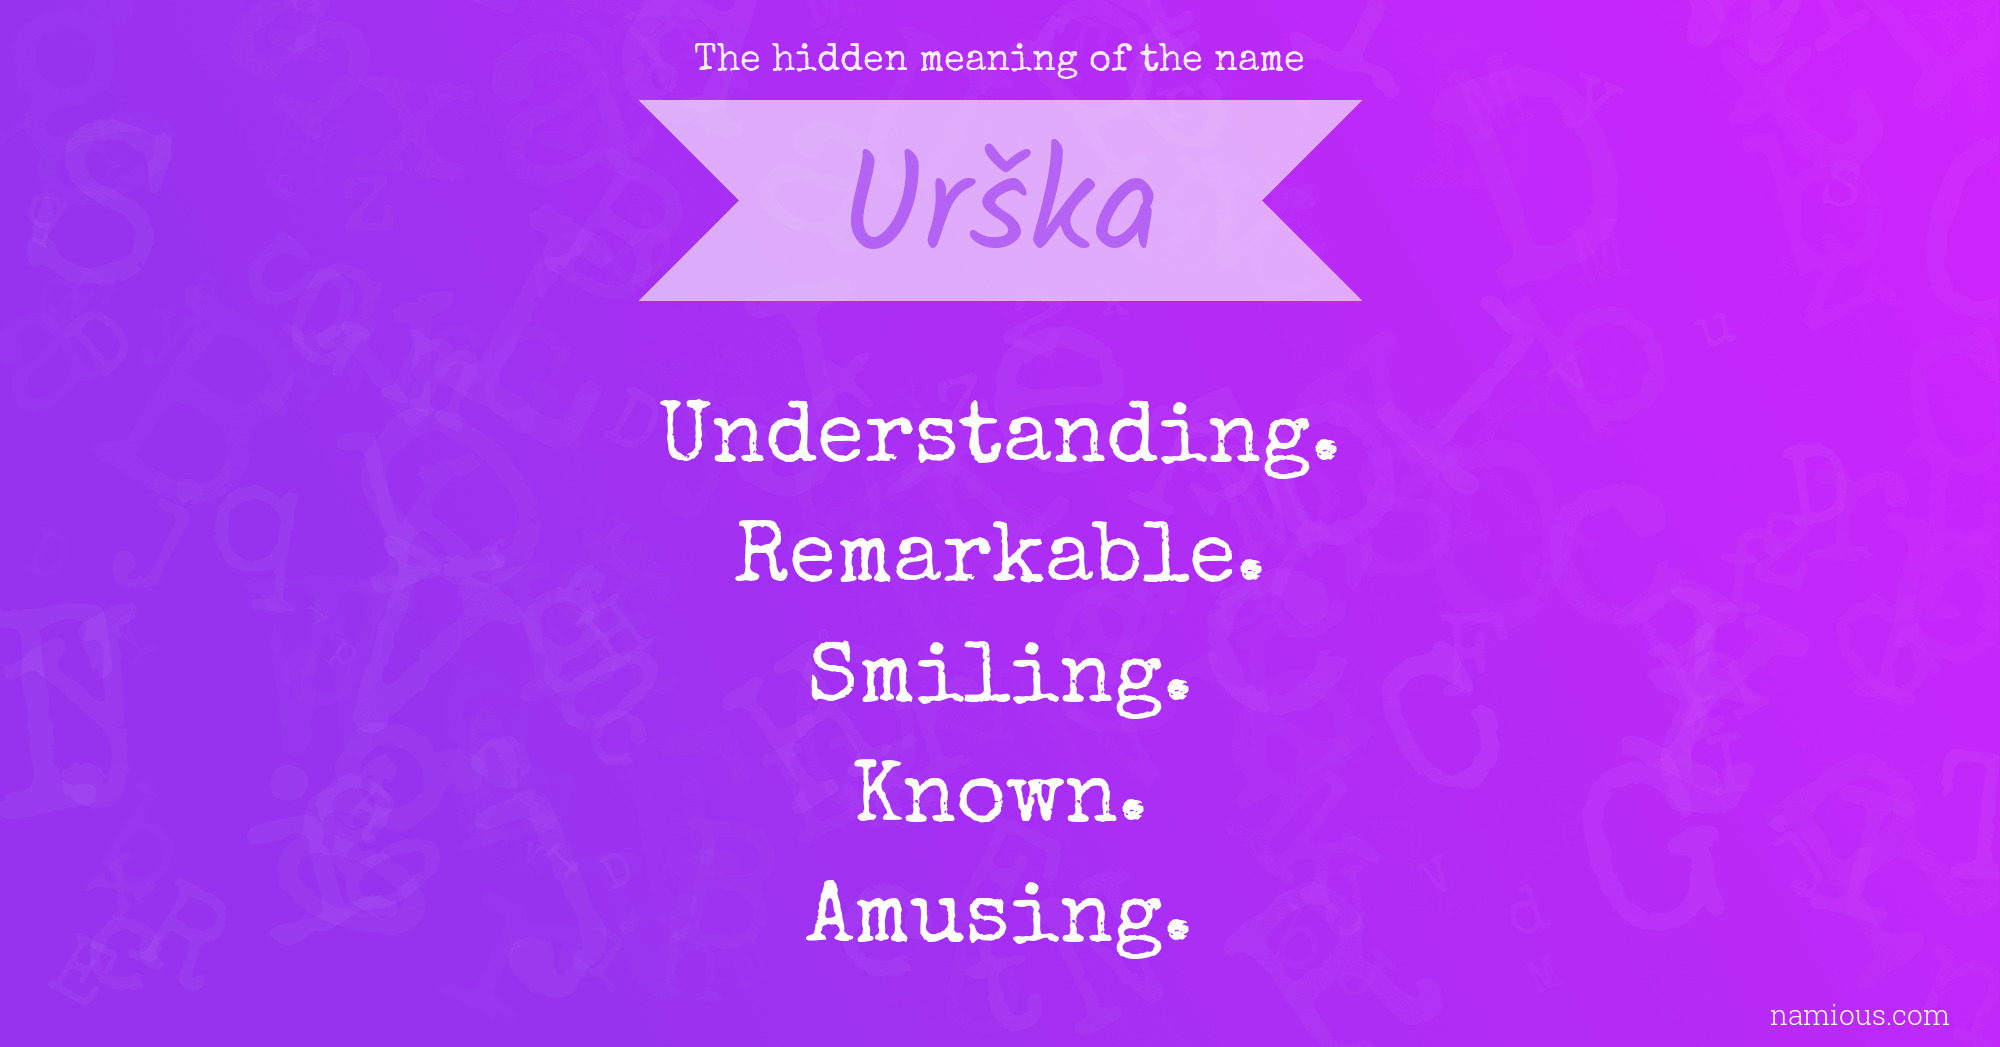 The hidden meaning of the name Urška